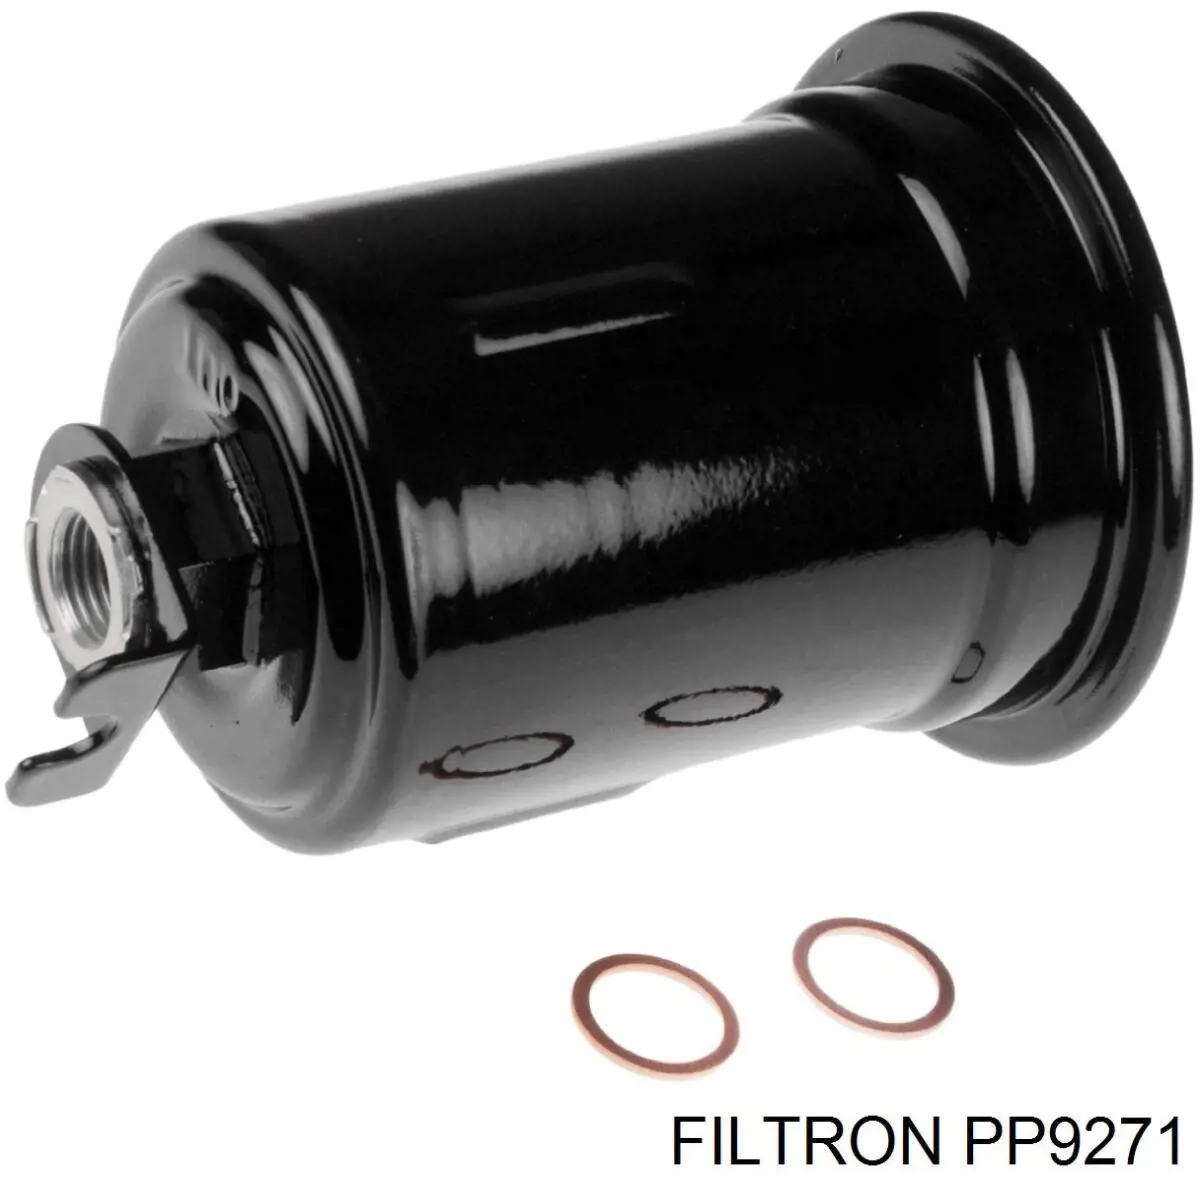 PP9271 Filtron filtro combustible